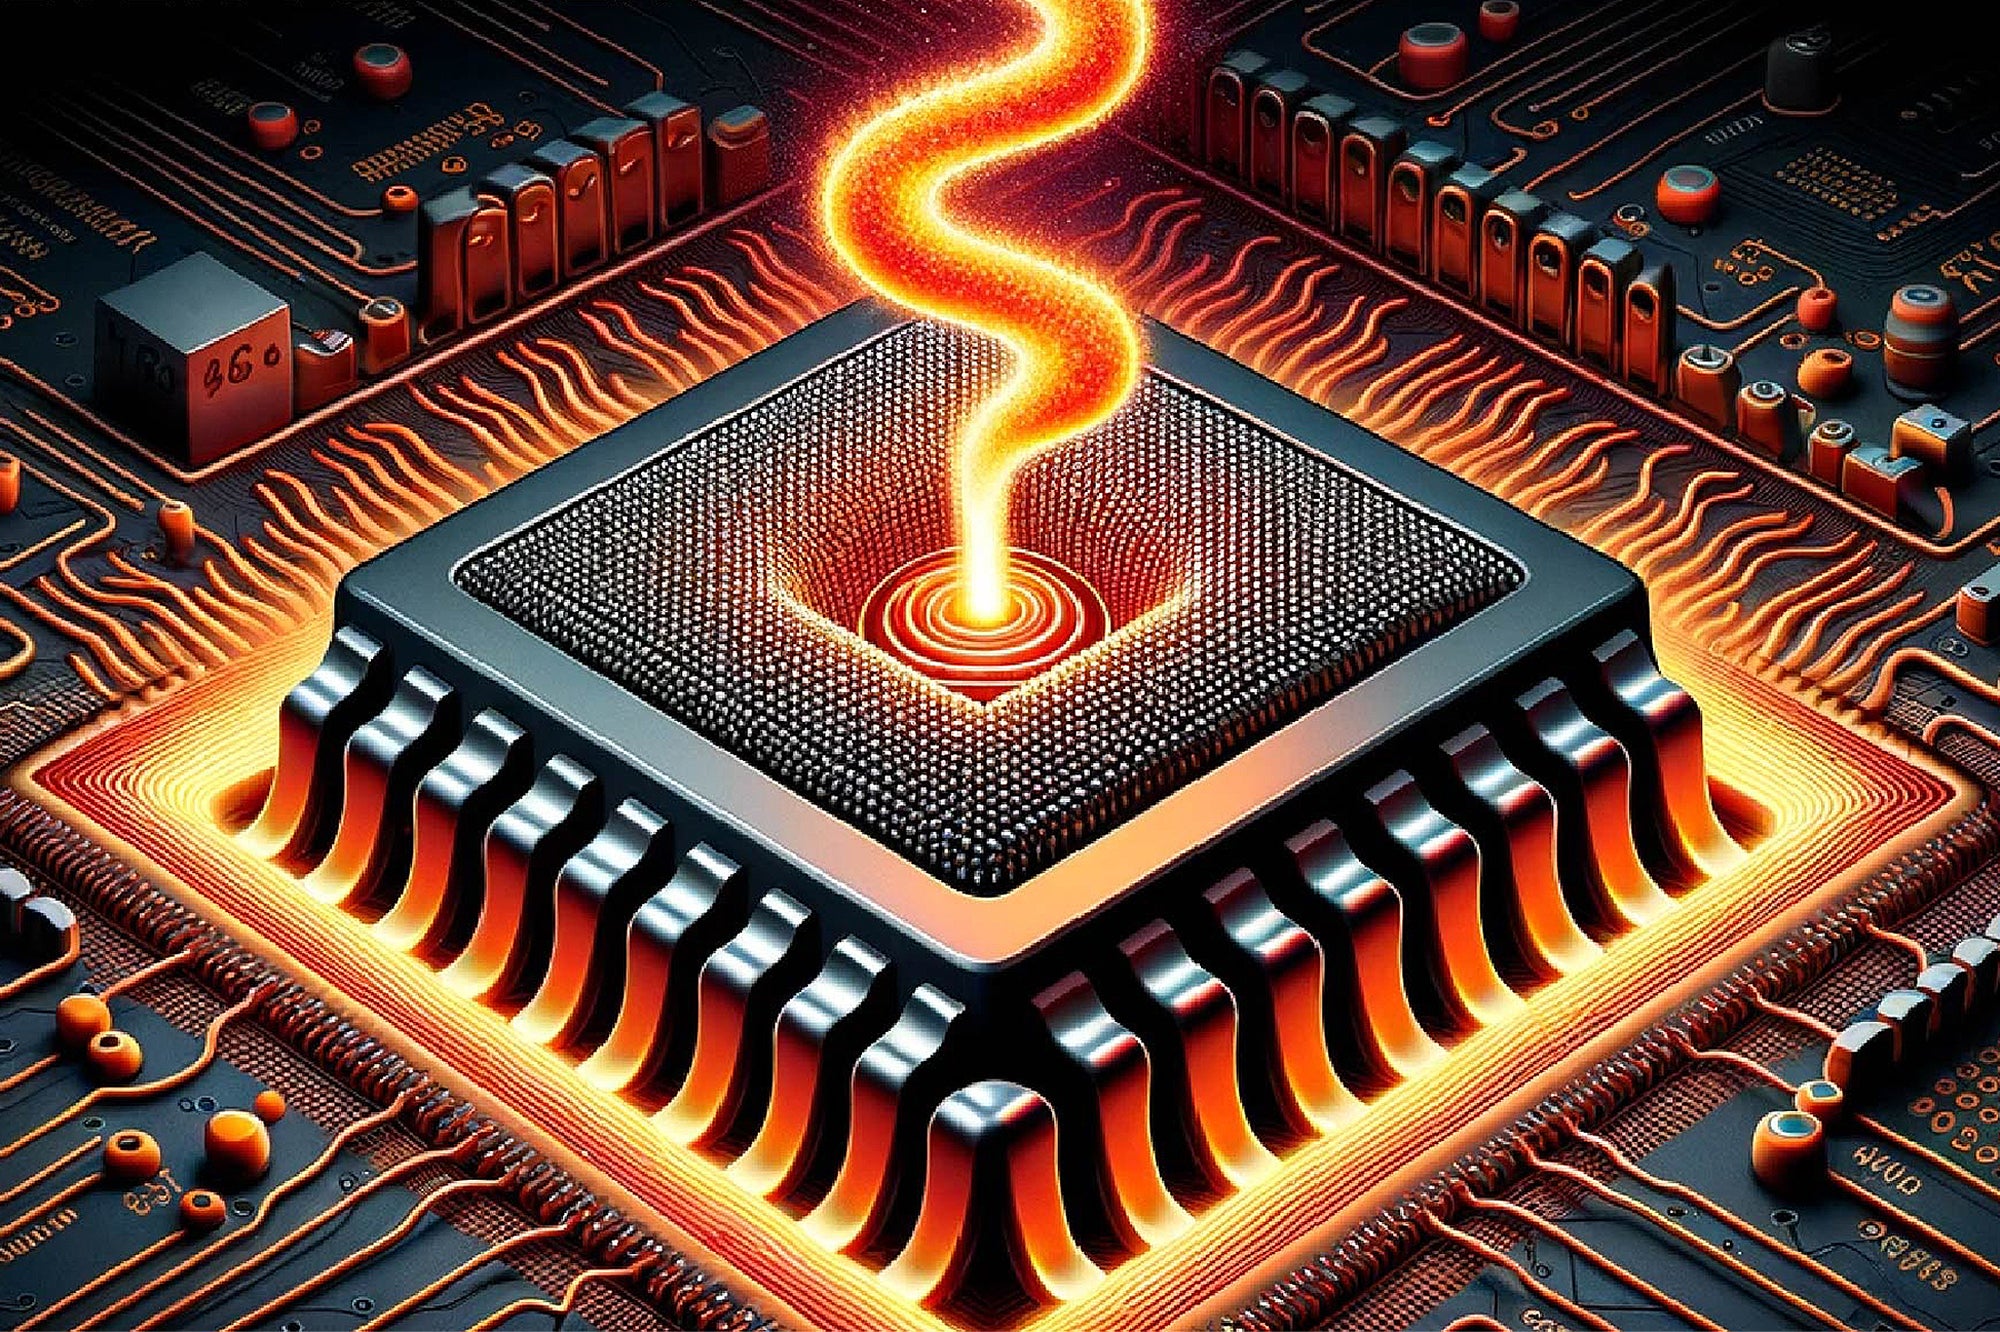 Scientists Finally Invent Heat-Controlling Circuitry That Keeps Electronics Cool